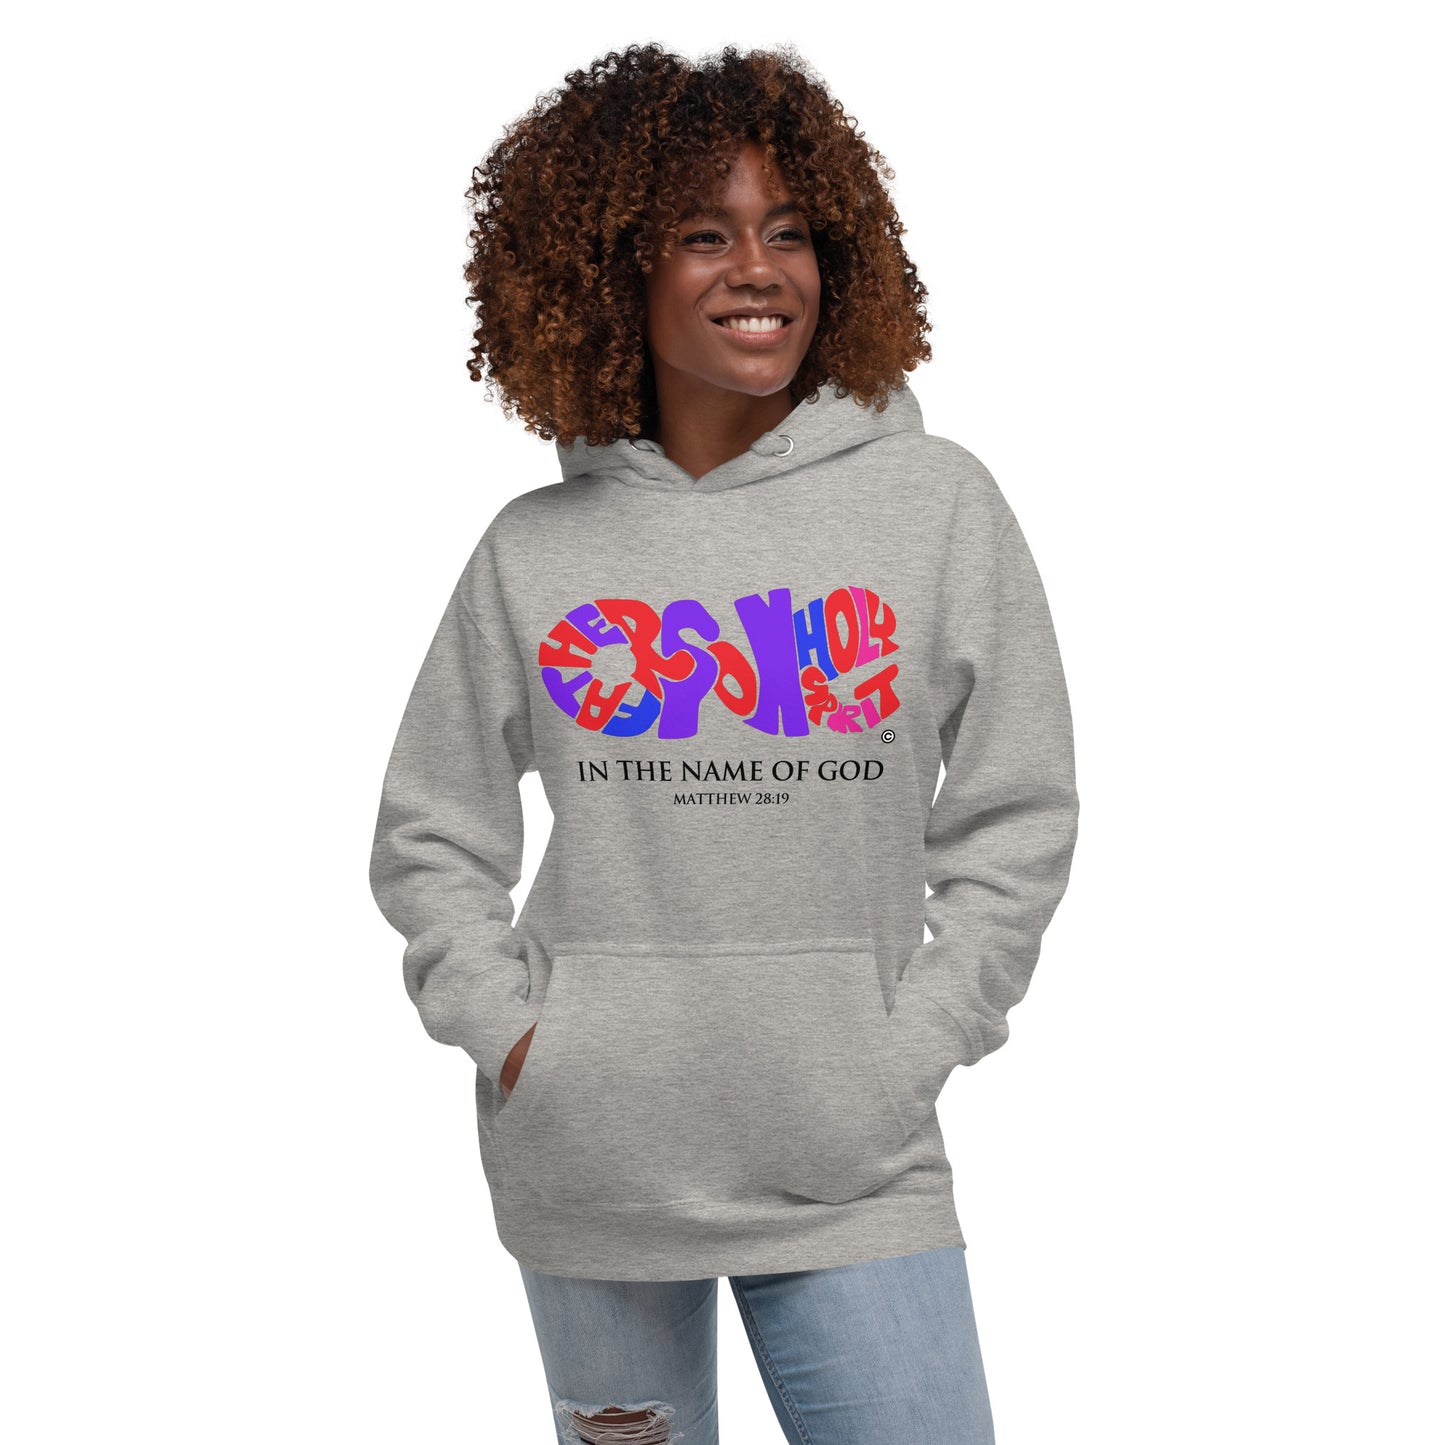 In the Name of God Women's Hoodie